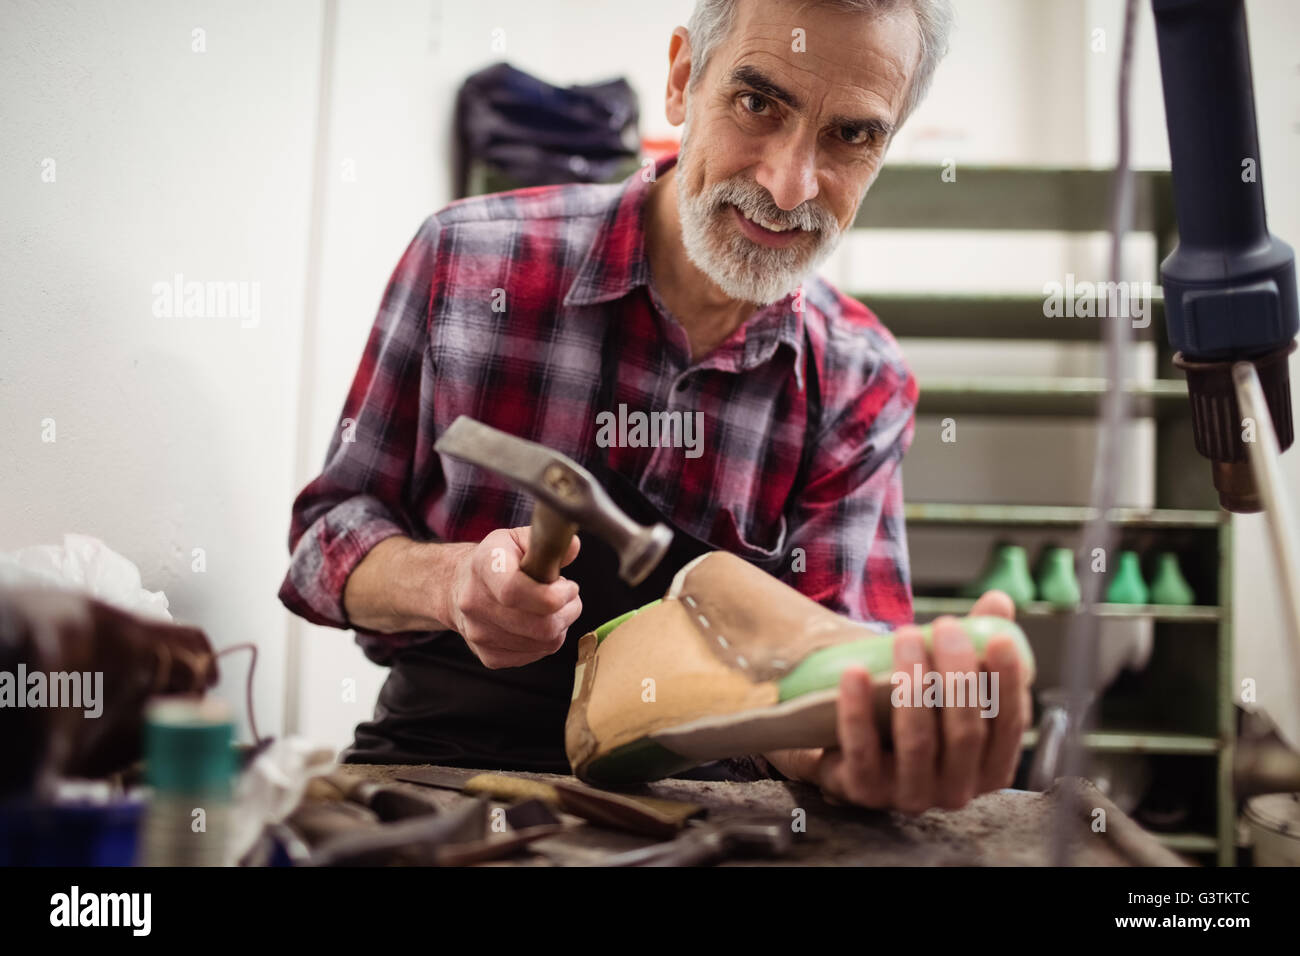 Cobbler smiling and hammering on a shoe Stock Photo